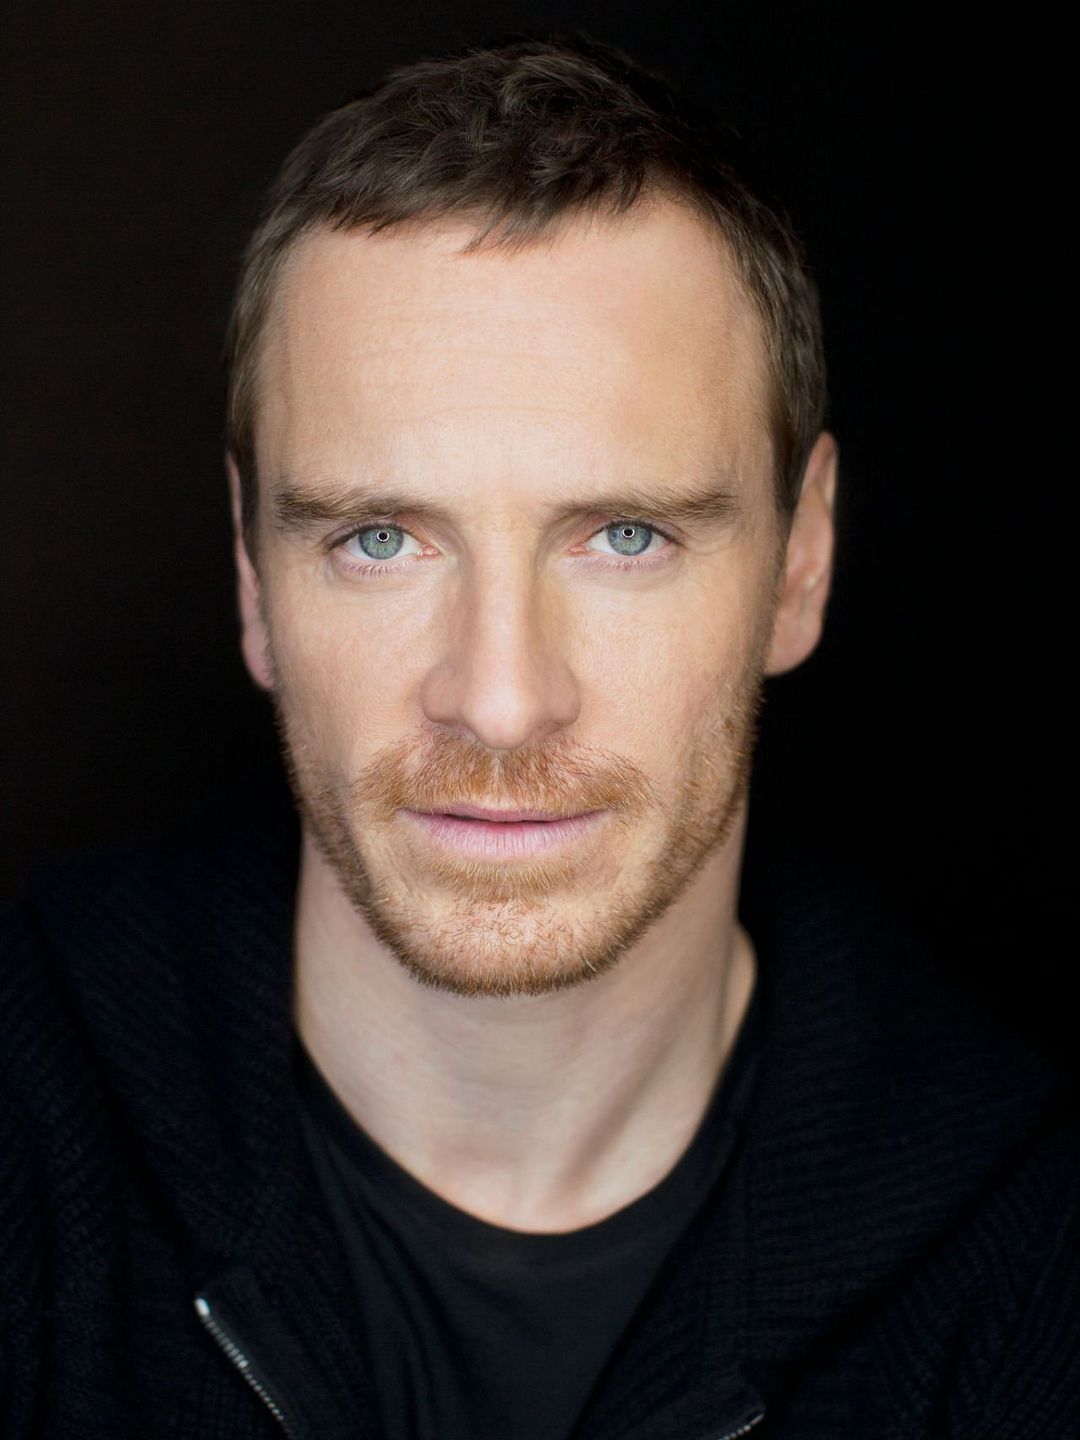 Michael Fassbender who is his father